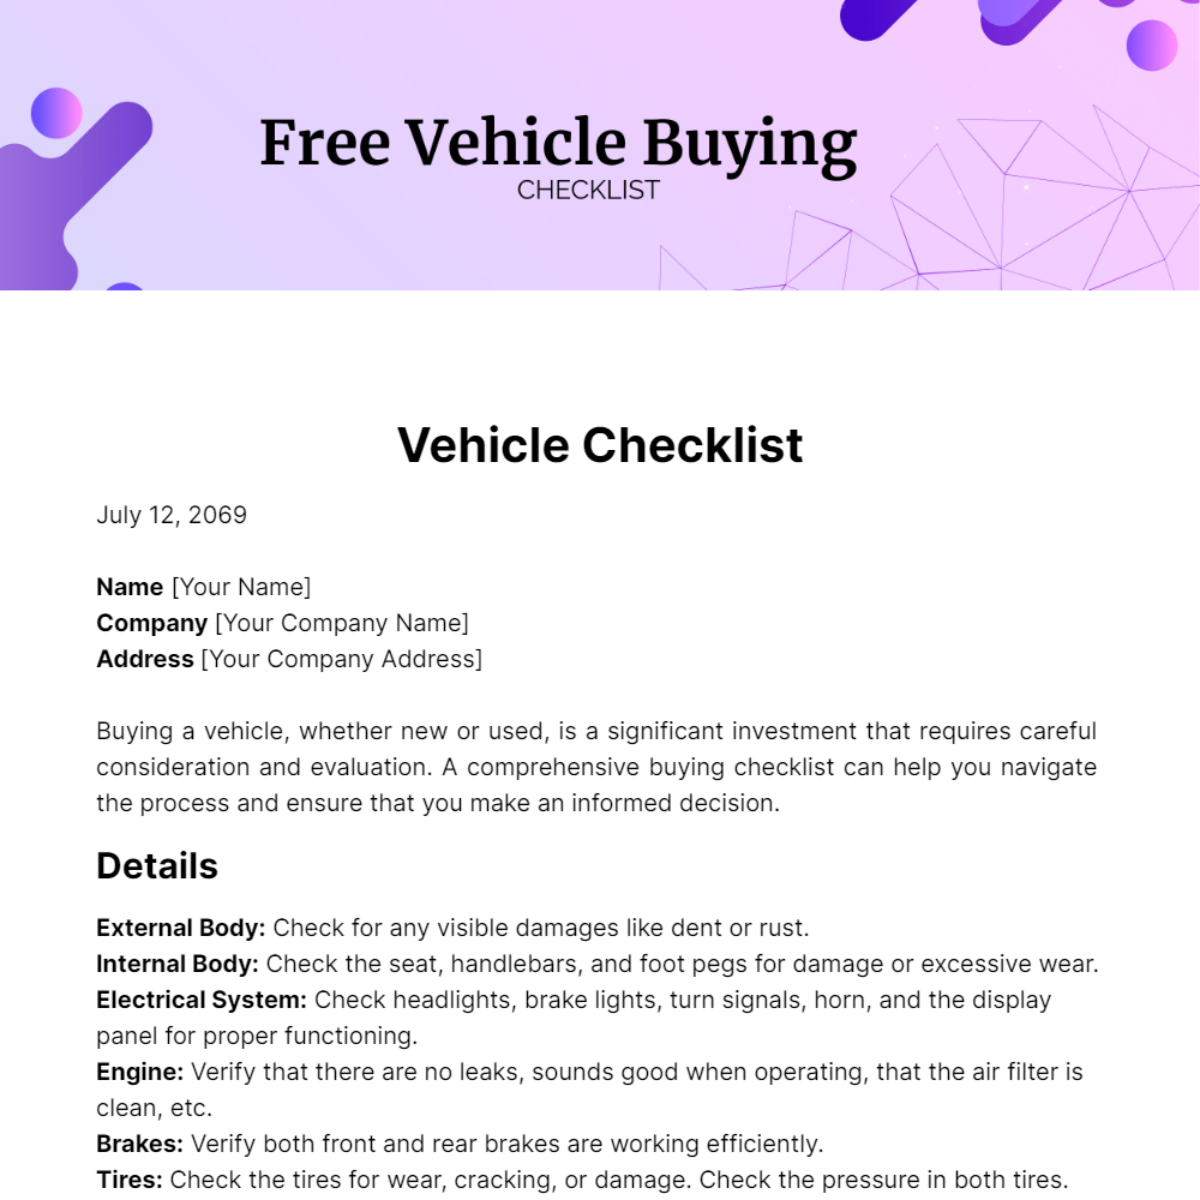 Free Vehicle Buying Checklist Template